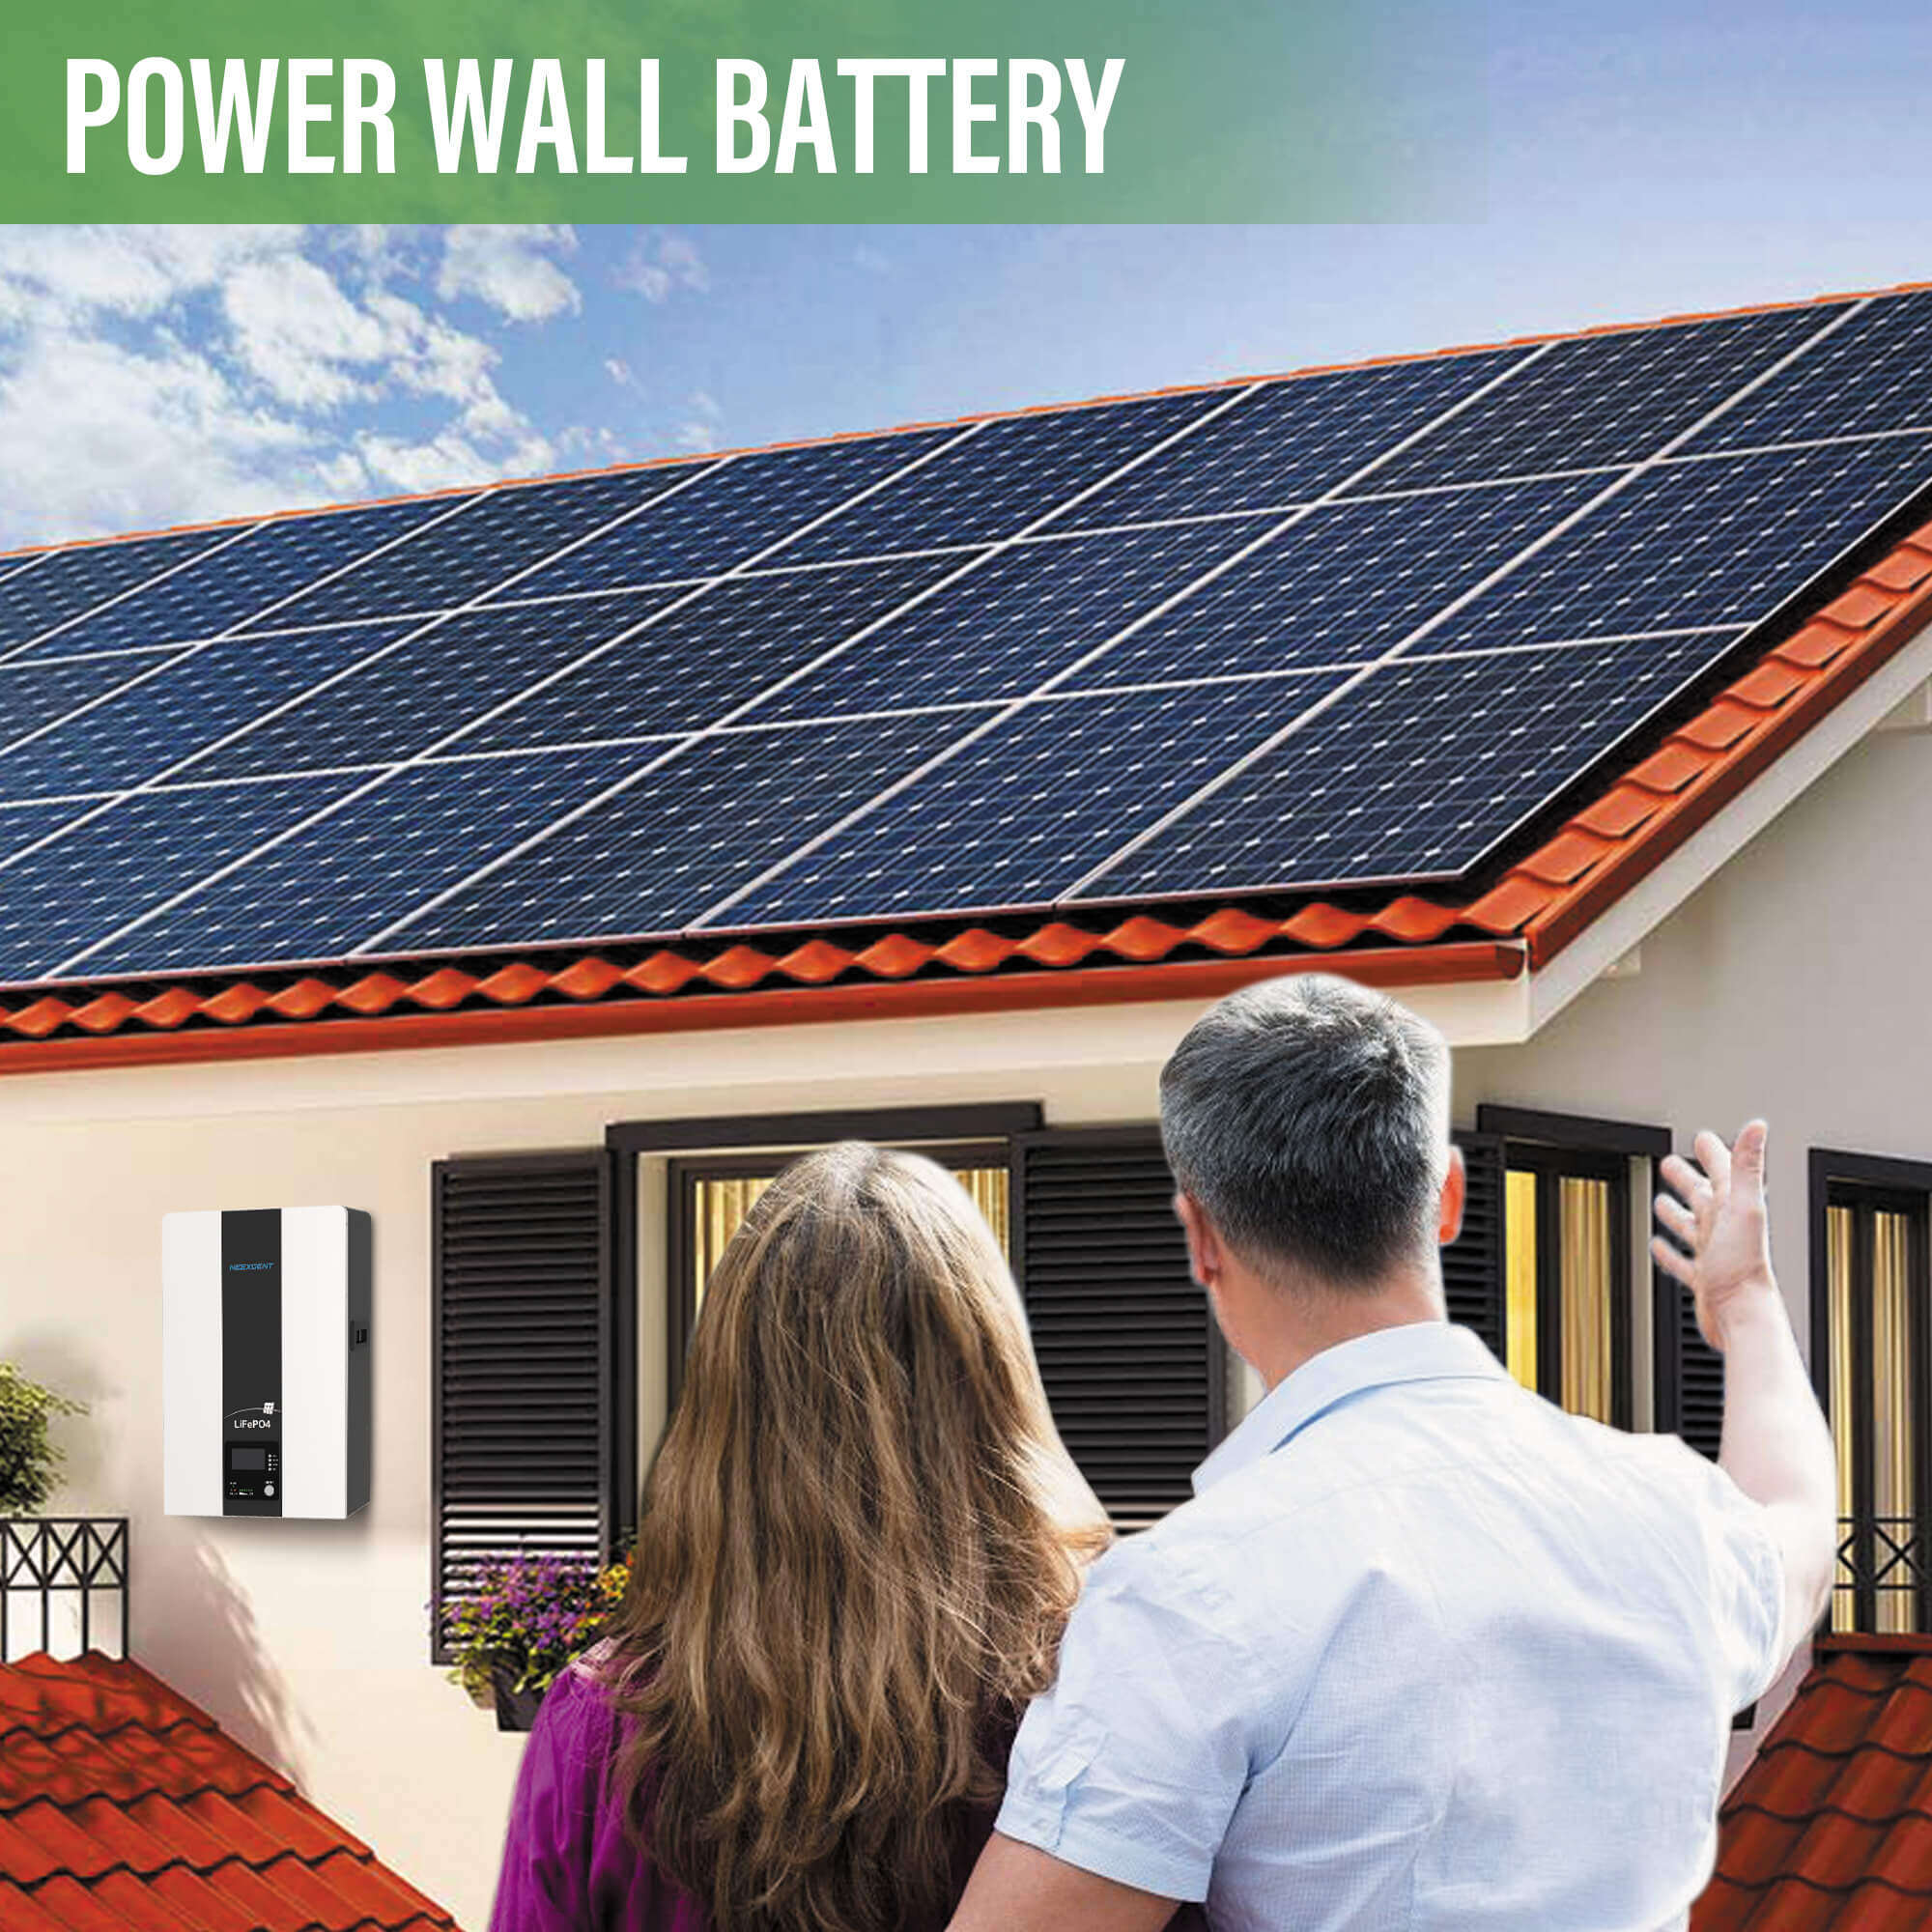 How wall power can help you live a better life